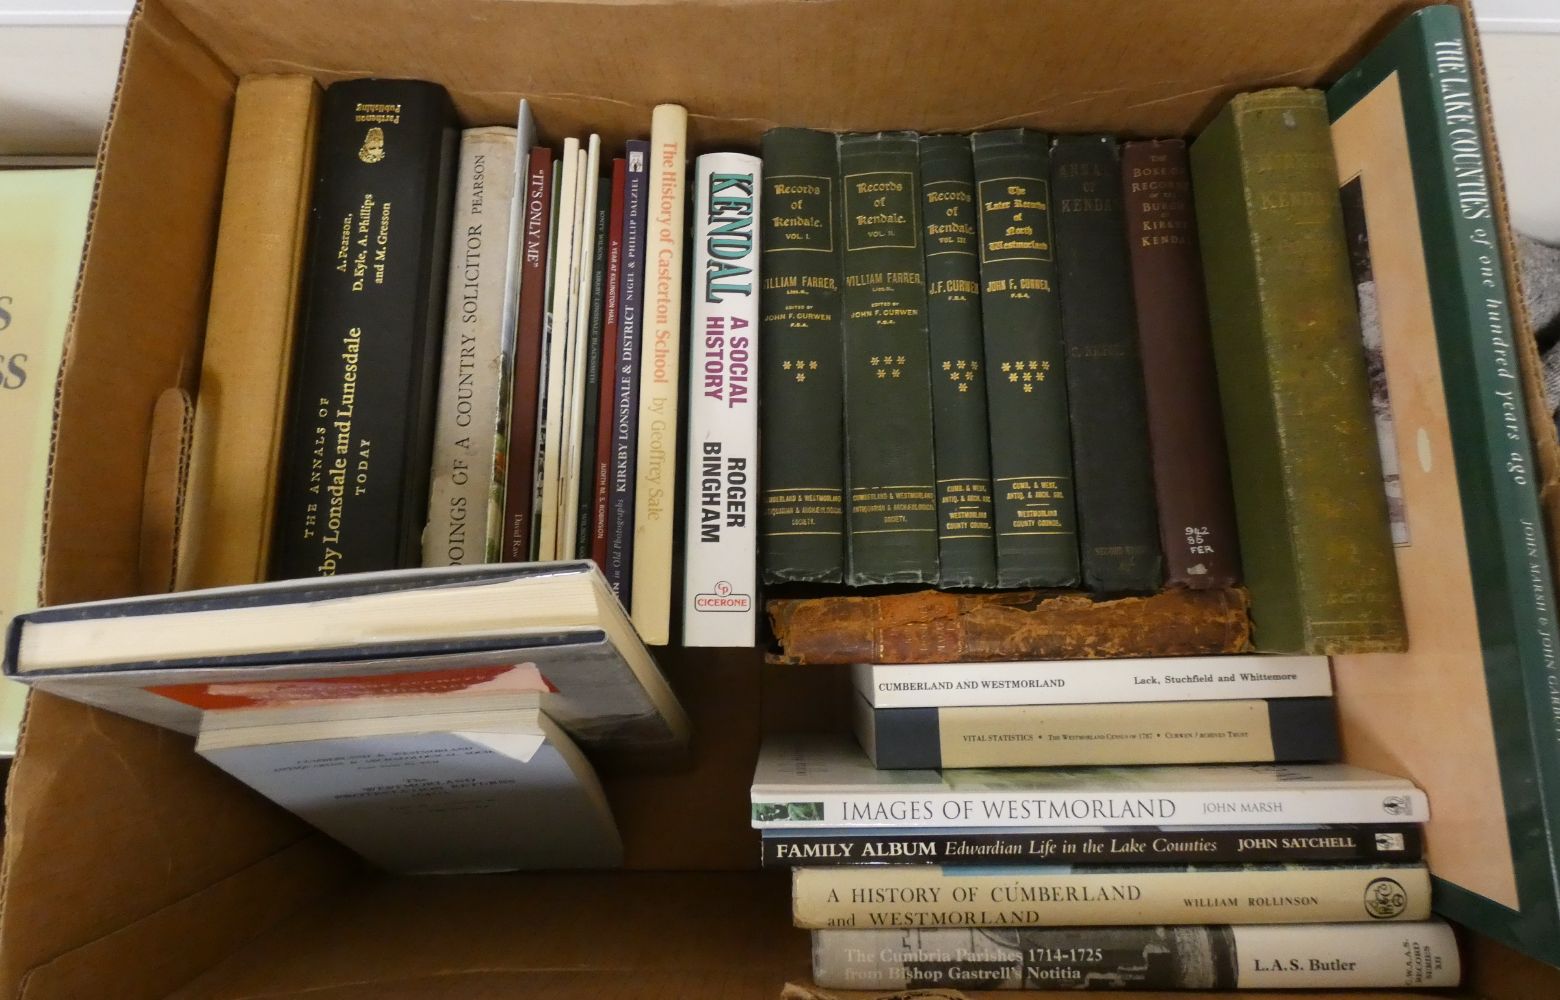 Carlisle -  Antiquarian & Collectable Books and Related Items.